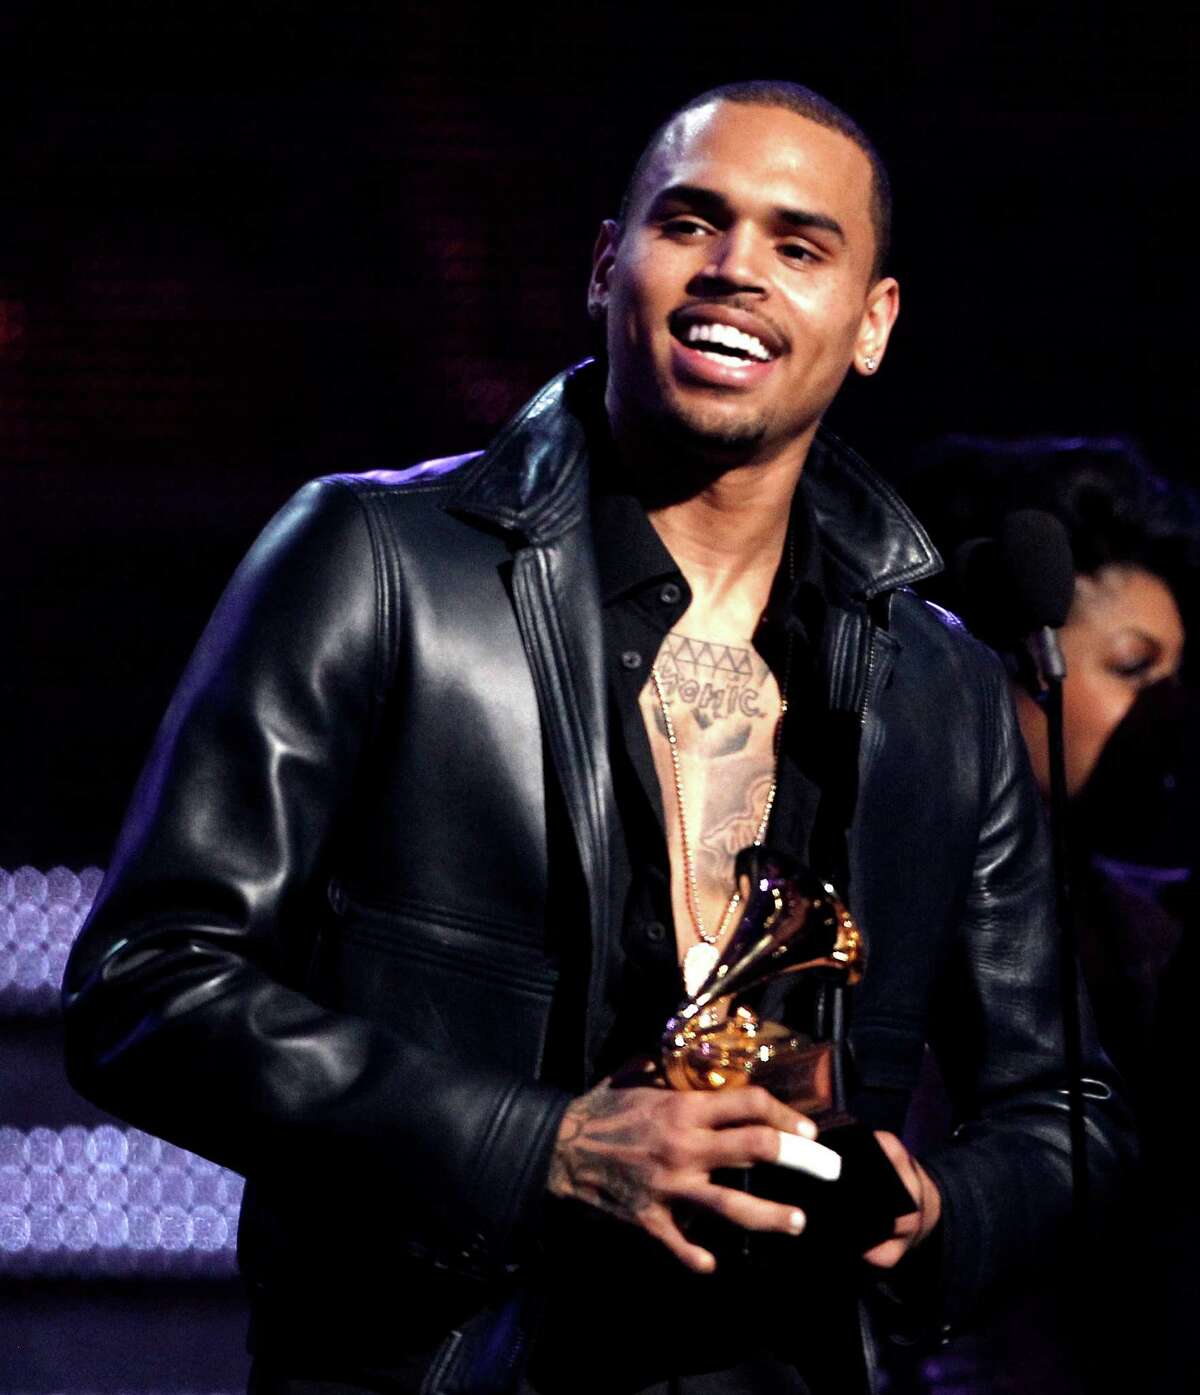 FILE - In this Feb. 12, 2012 file photo, Chris Brown accepts the award for best R&B album for "F.A.M.E." during the 54th annual Grammy Awards in Los Angeles. A judge in Los Angeles ordered a further review of Brown's community service on Monday, Sept. 24, 2012 and set another hearing to determine whether the singer is in compliance with the terms of his probation for the 2009 beating of then-girlfriend Rihanna. (AP Photo/Matt Sayles, File)